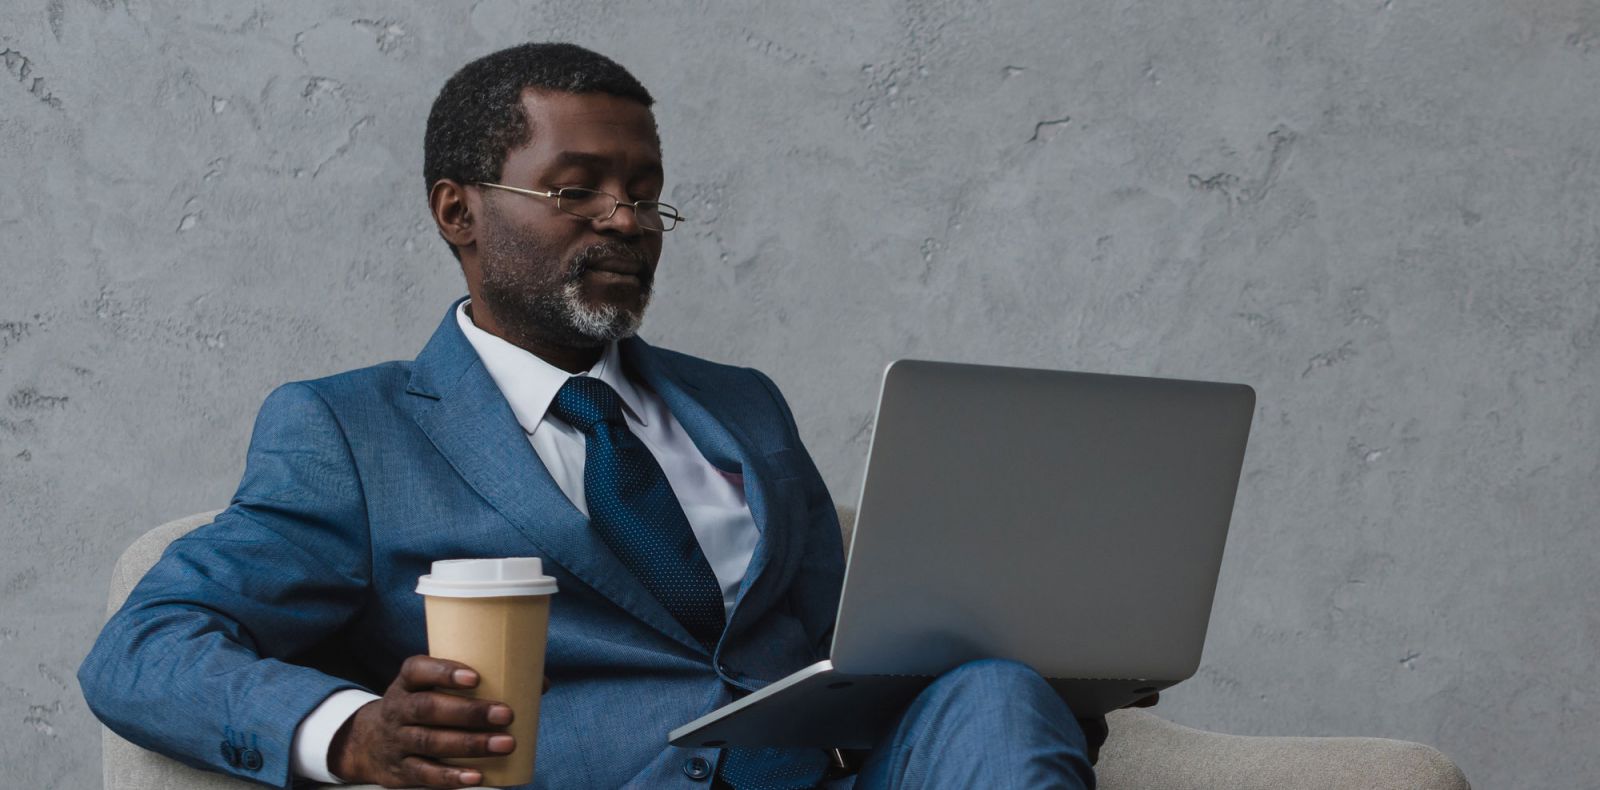 Mature man seated with laptop holding a coffee